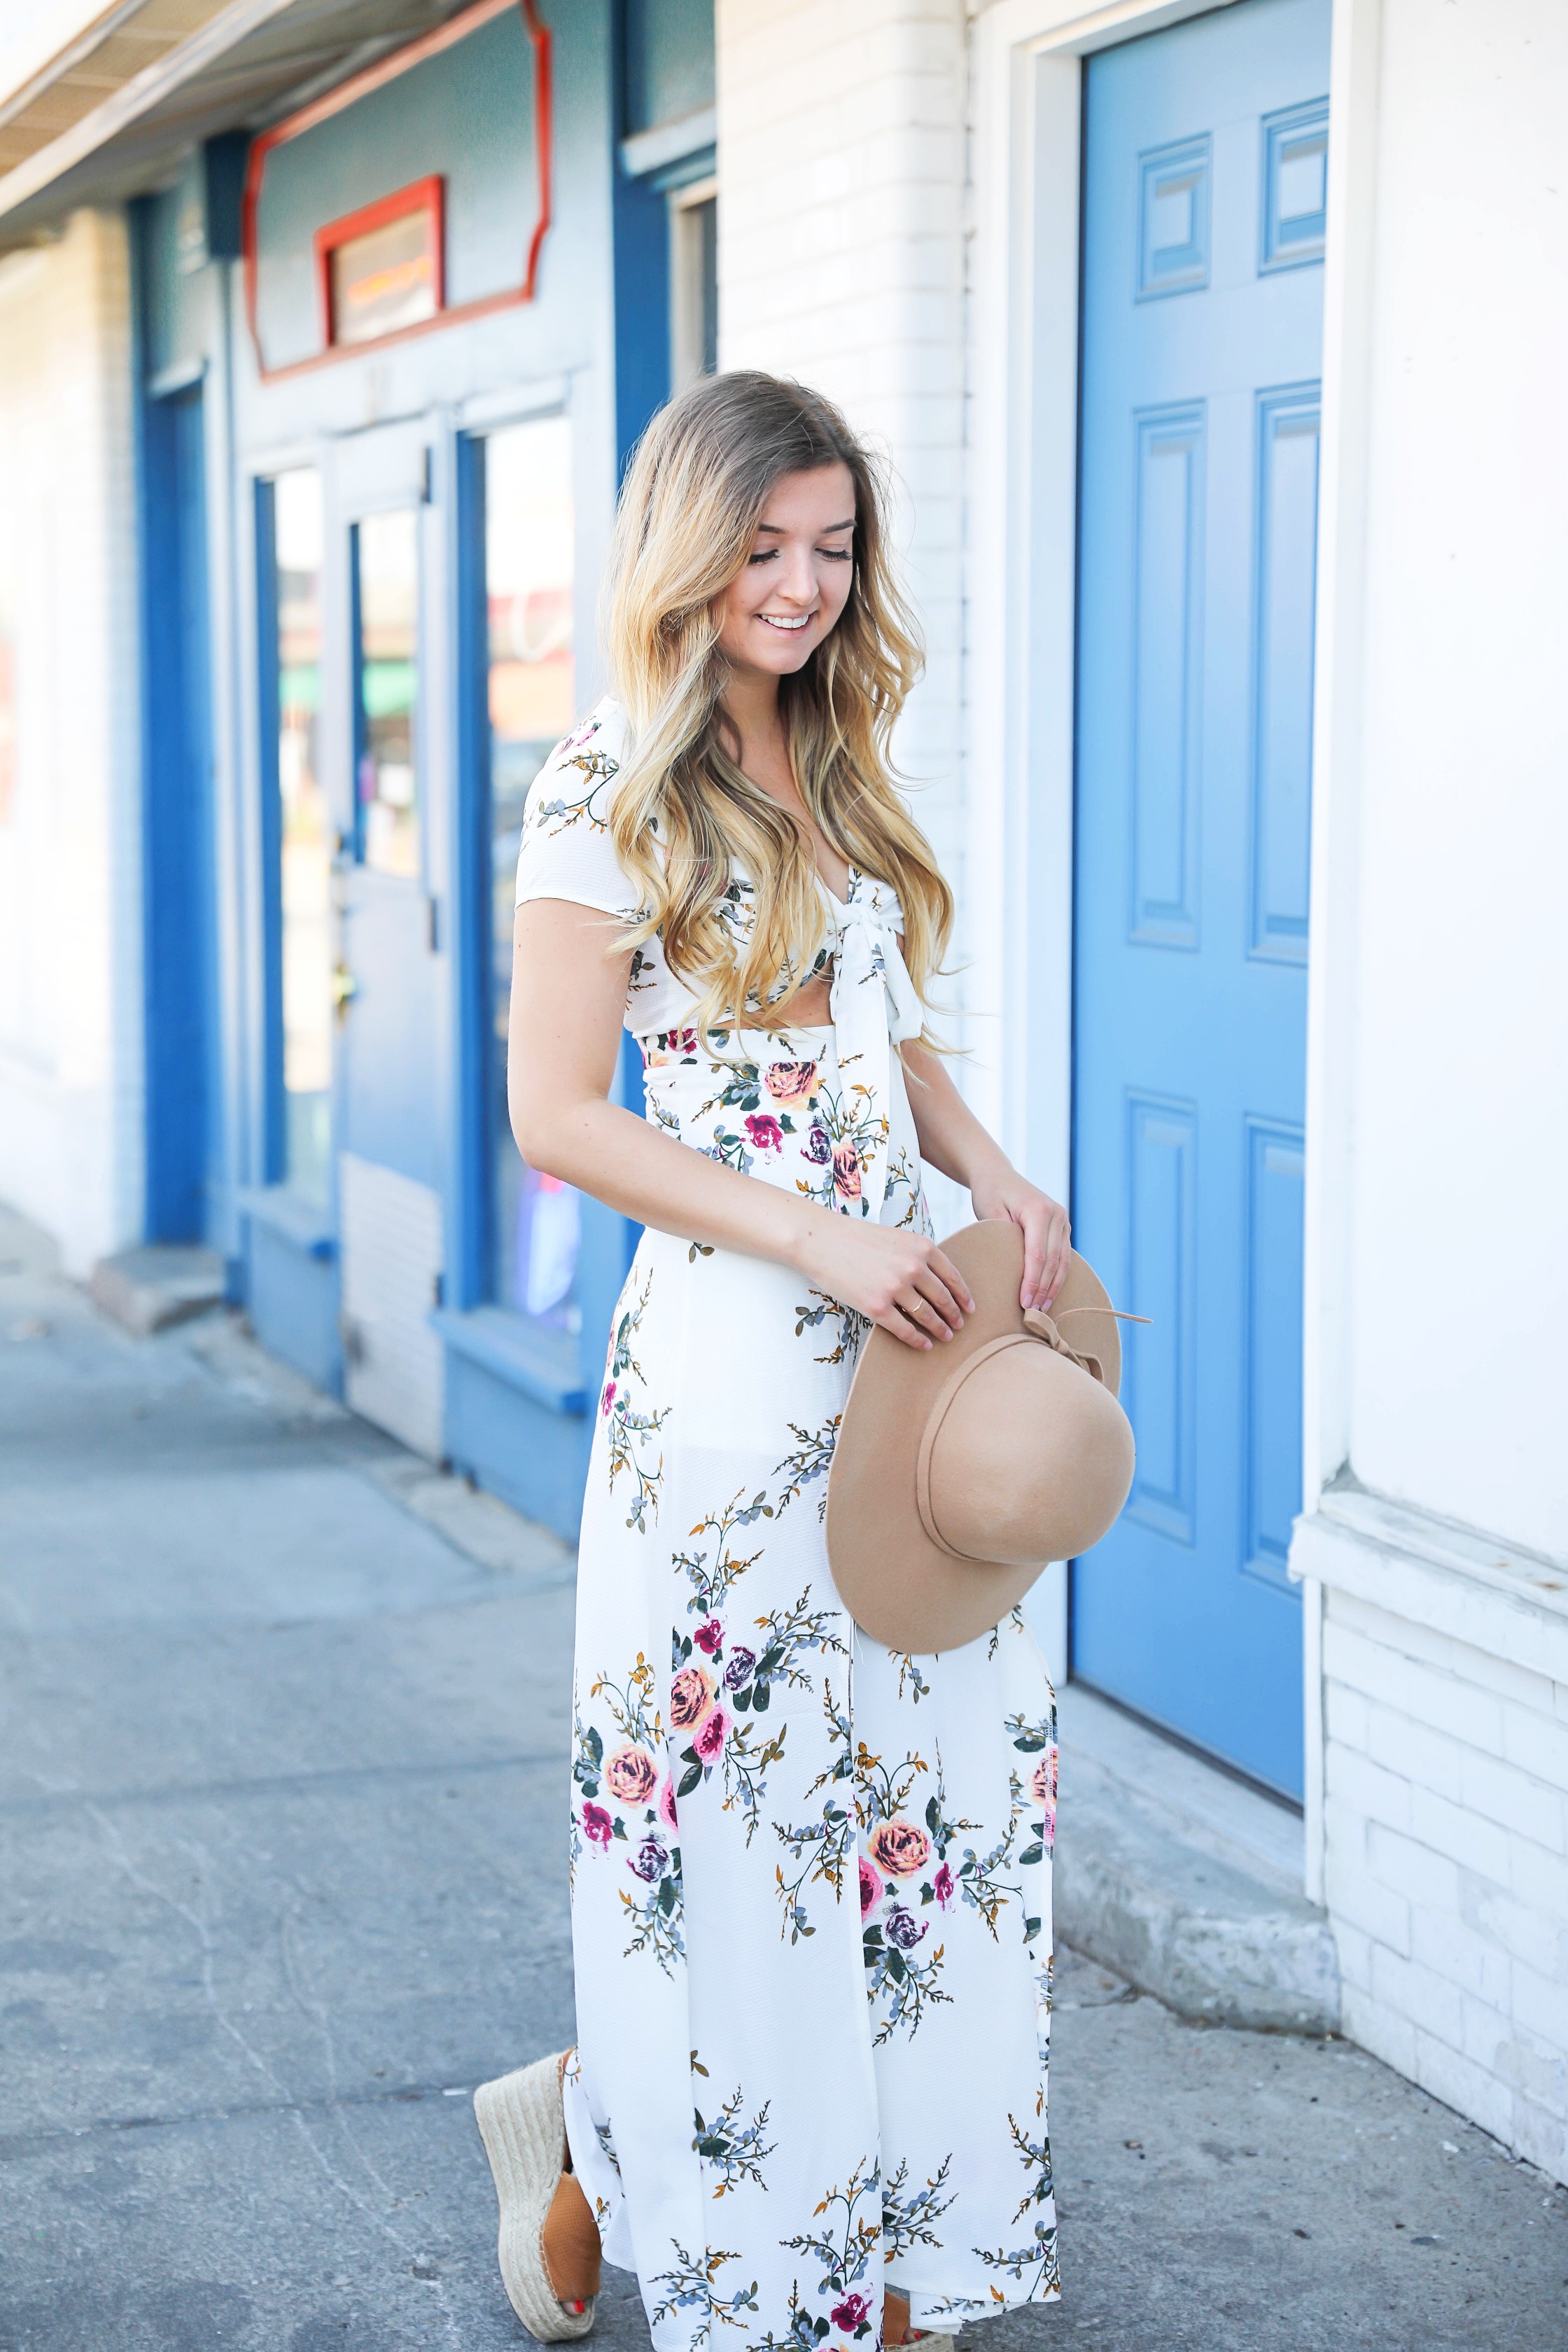 White floral maxi dress from showpo! I love how the dress is tied at the top and the stomach is open! I paired it with a tan felt floppy hat and cute espadrille wedges! Details on fashion blog from kansas city daily dose of charm by lauren lindmark